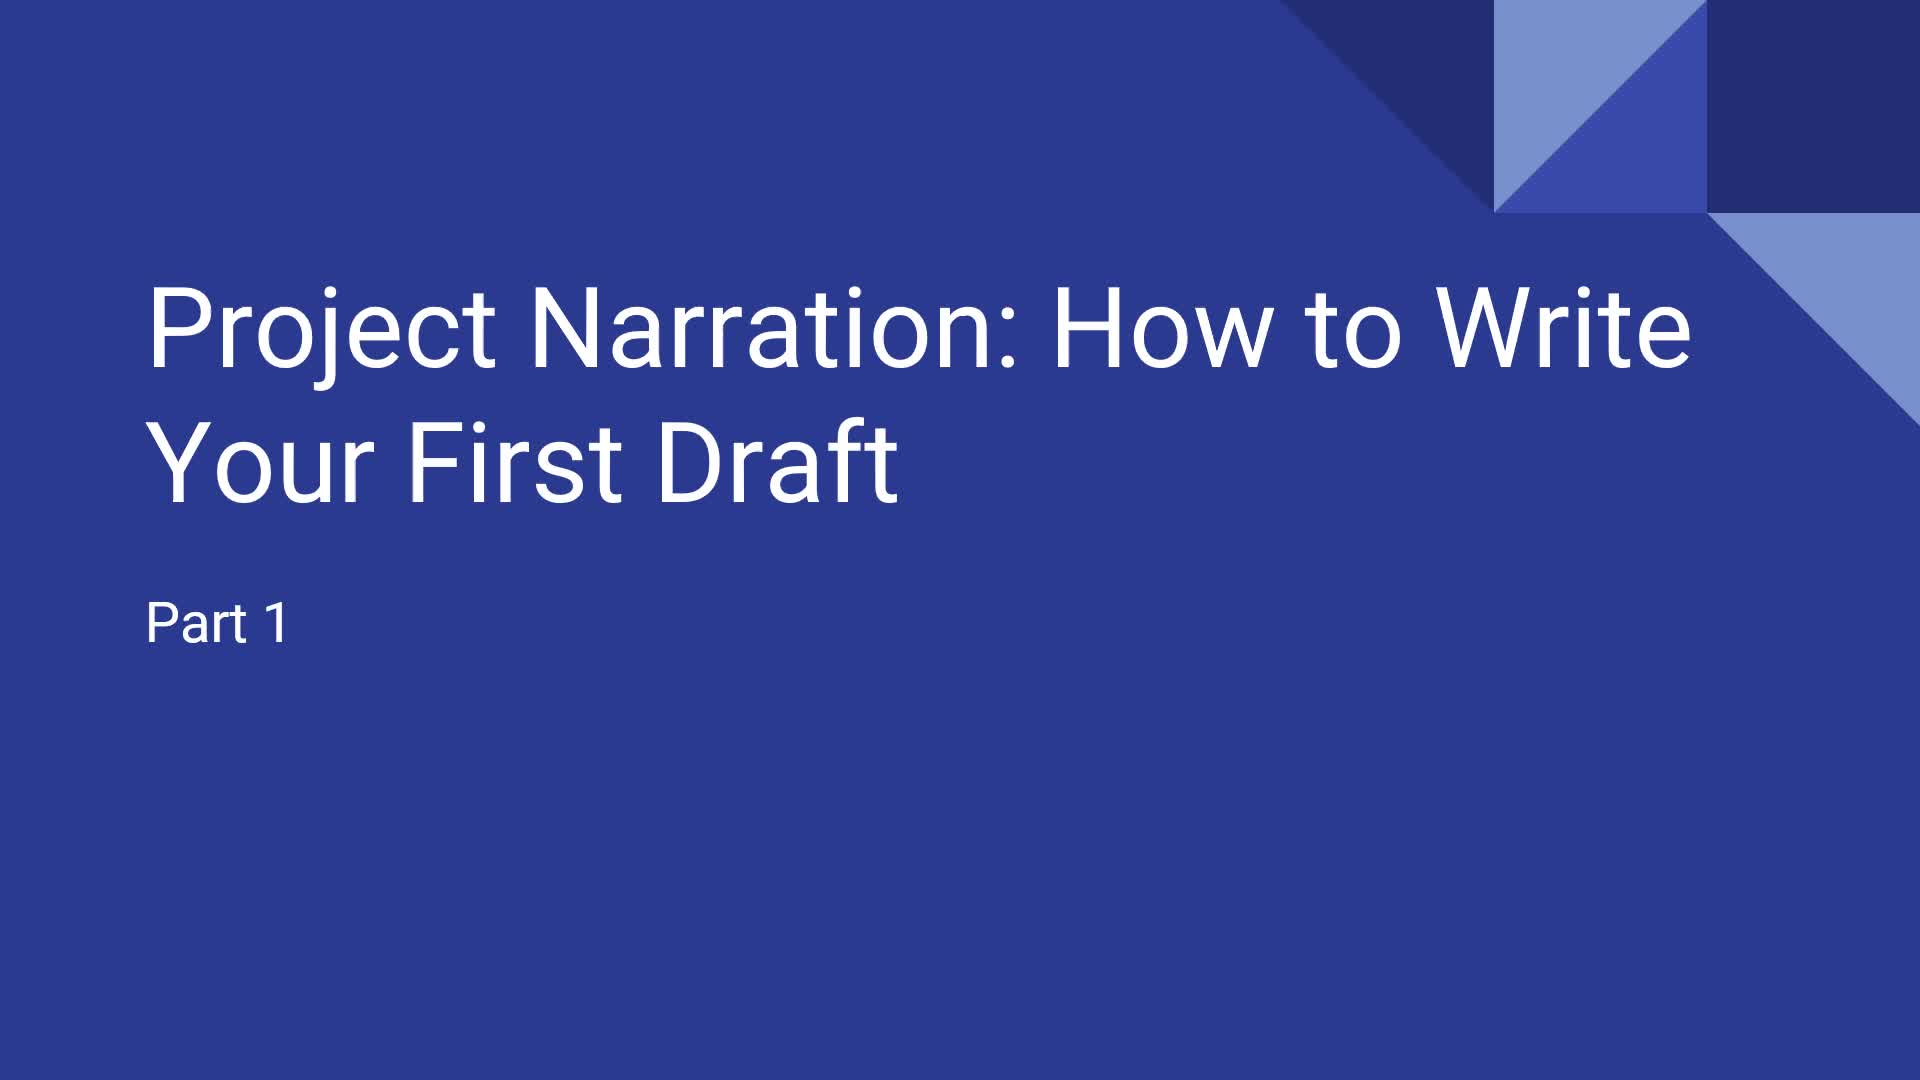 Project Narration: Writing Your First Draft Part 1